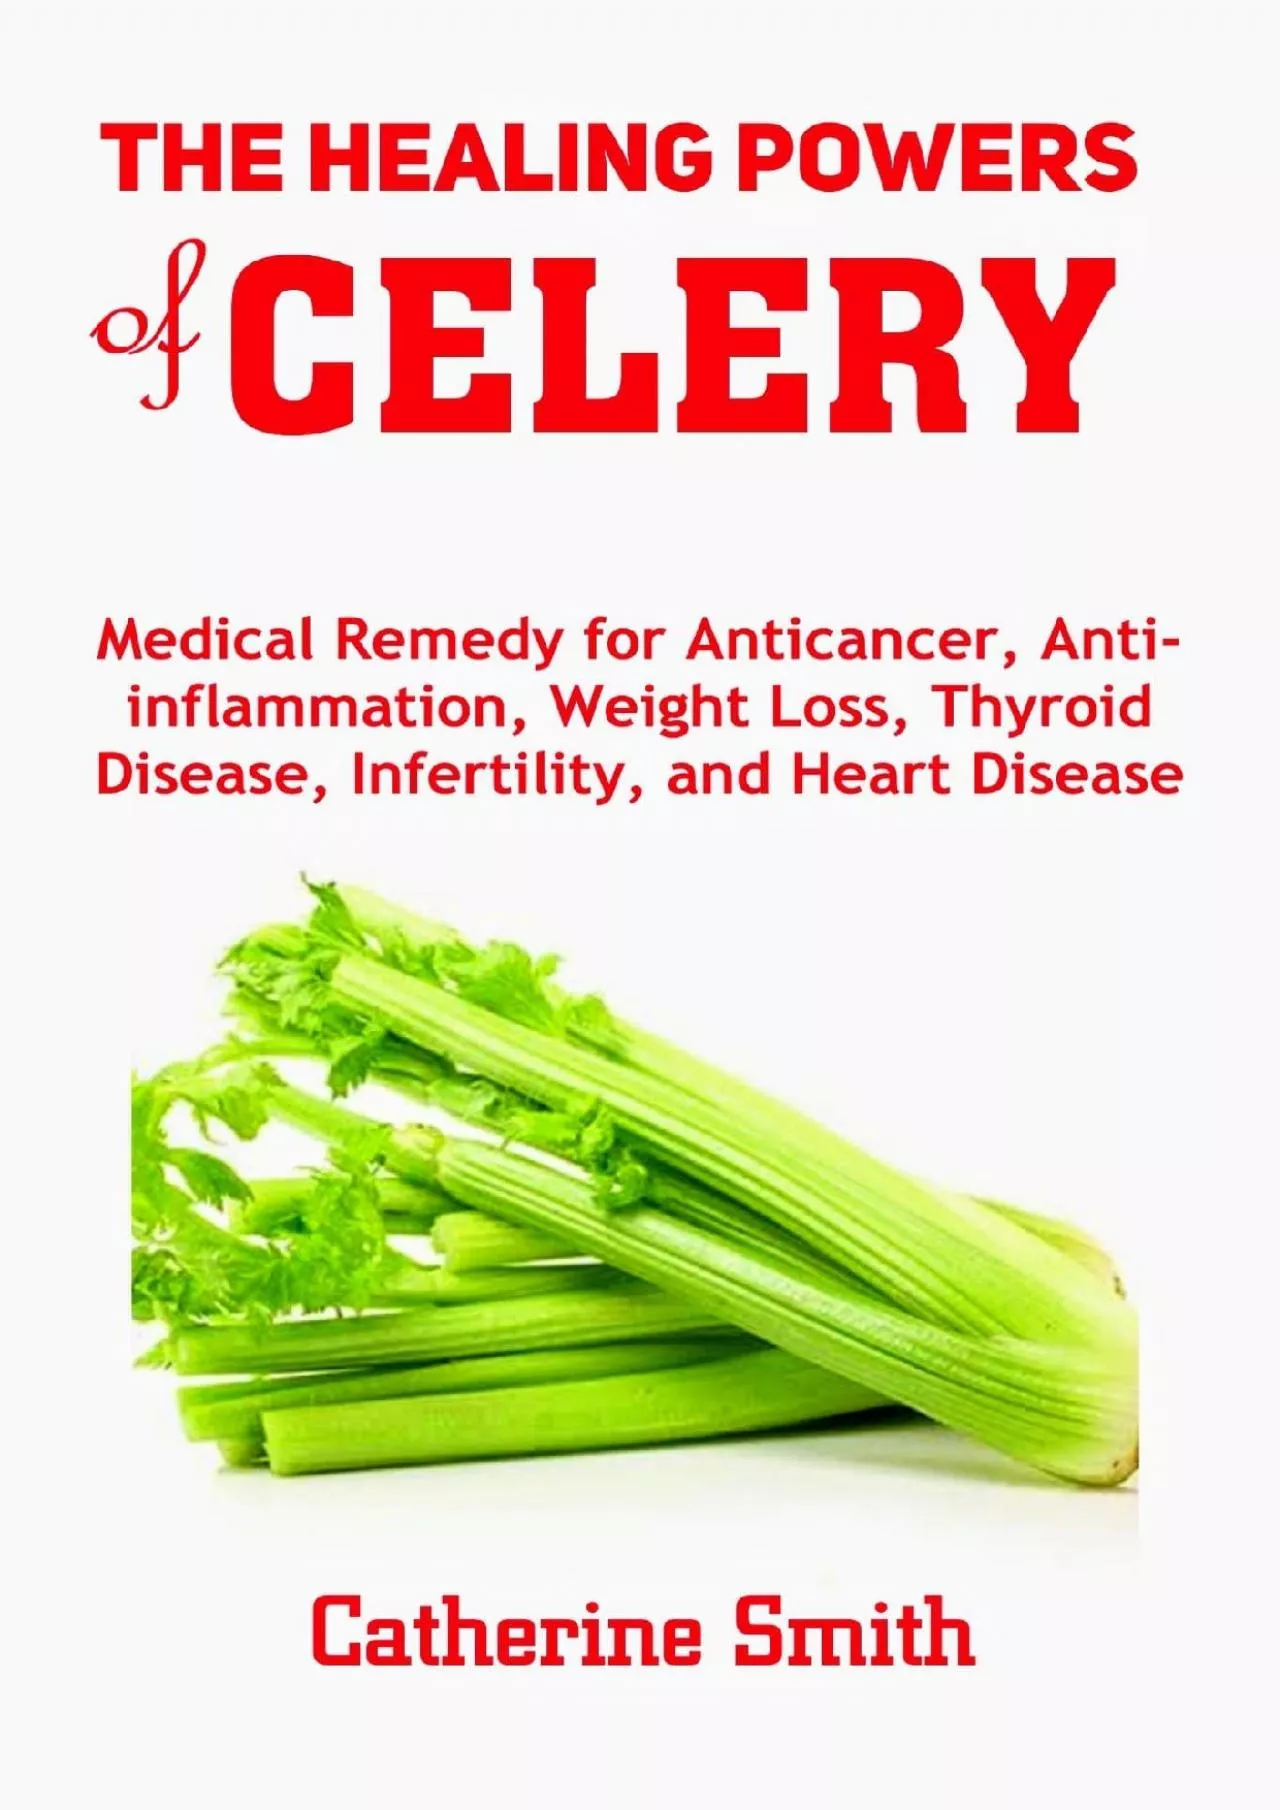 (EBOOK)-The Healing Powers of Celery: Medical Remedy for Anticancer, Anti-inflammation,